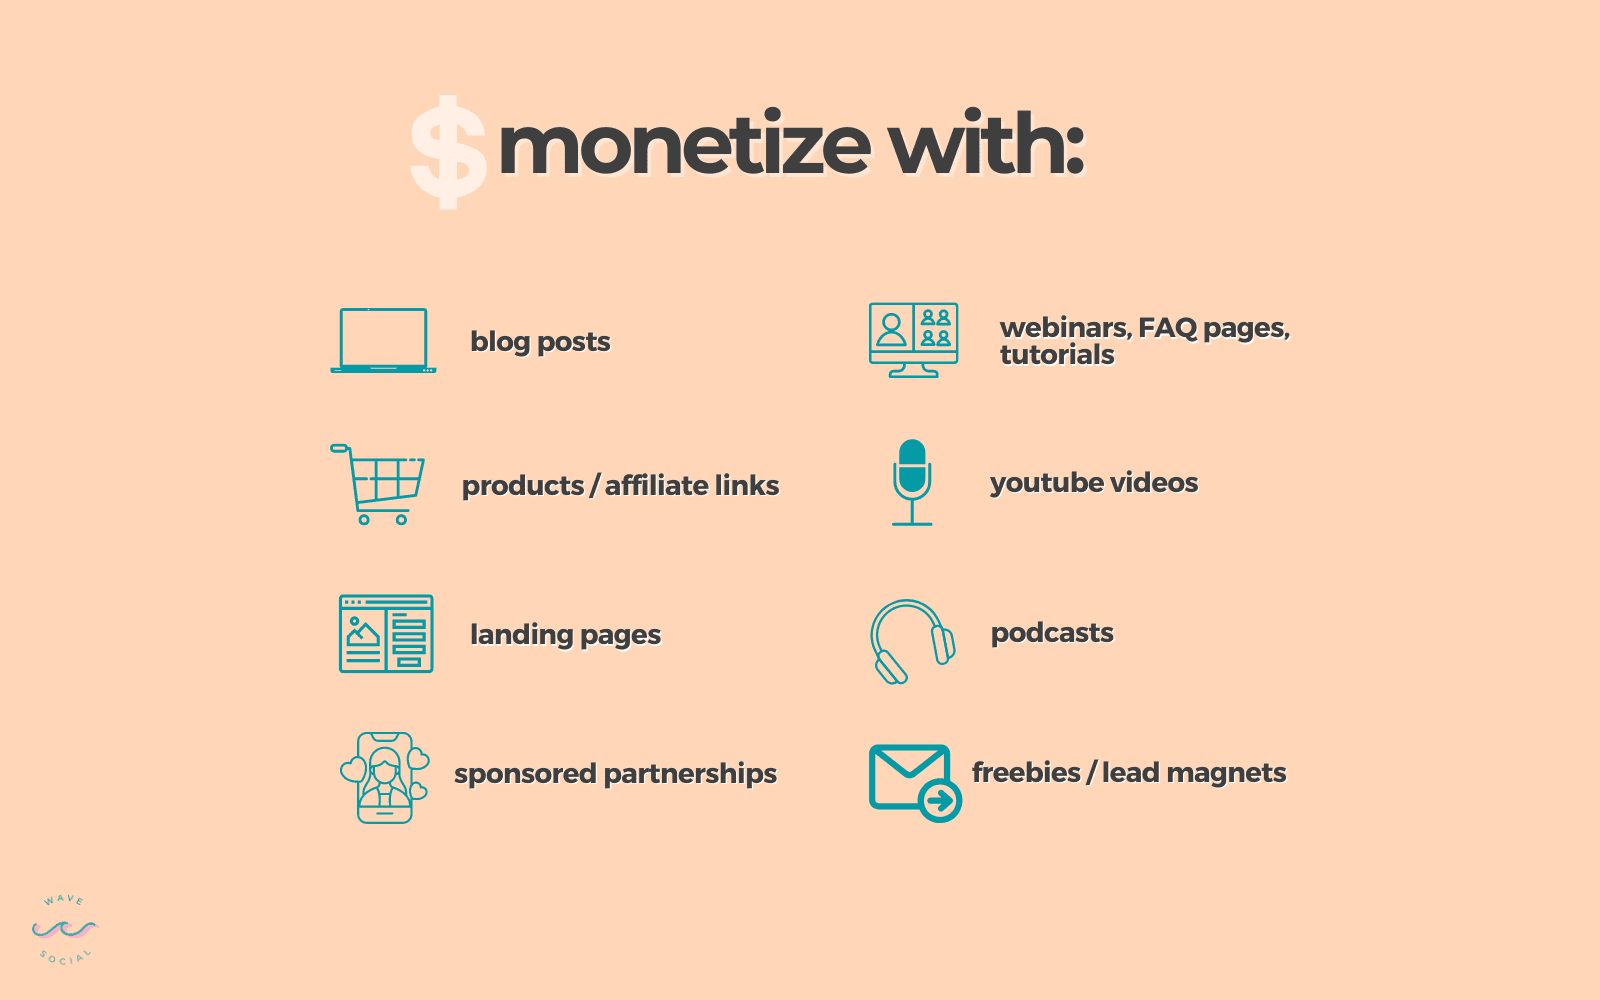 graphic that shows all of the ways to monetize with Pinterest: blog posts, products, affiliate links, landing pages, websites, youtube, podcasts, lead magnets, and sponsored posts.